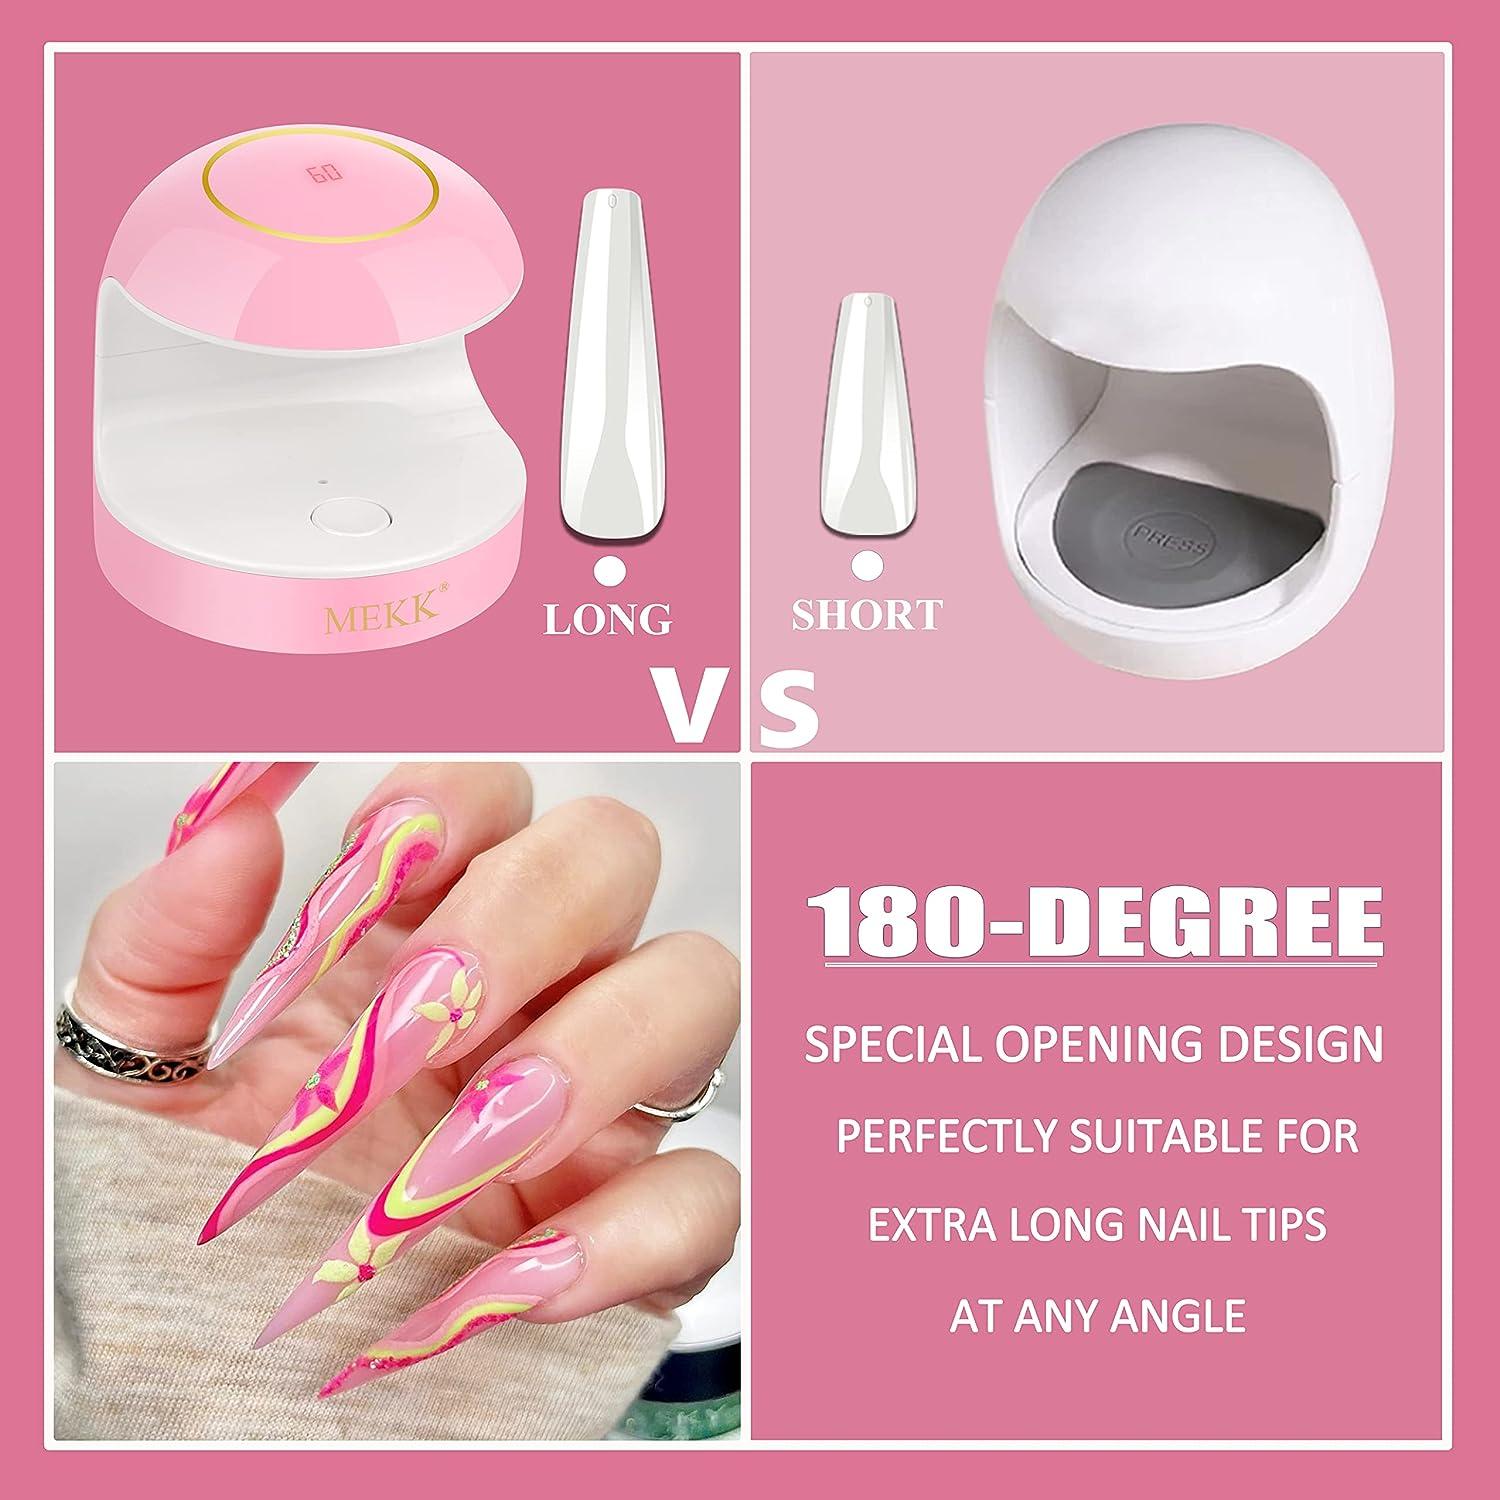 Are UV Nail Dryers Safe to Use with Gel Manicures?